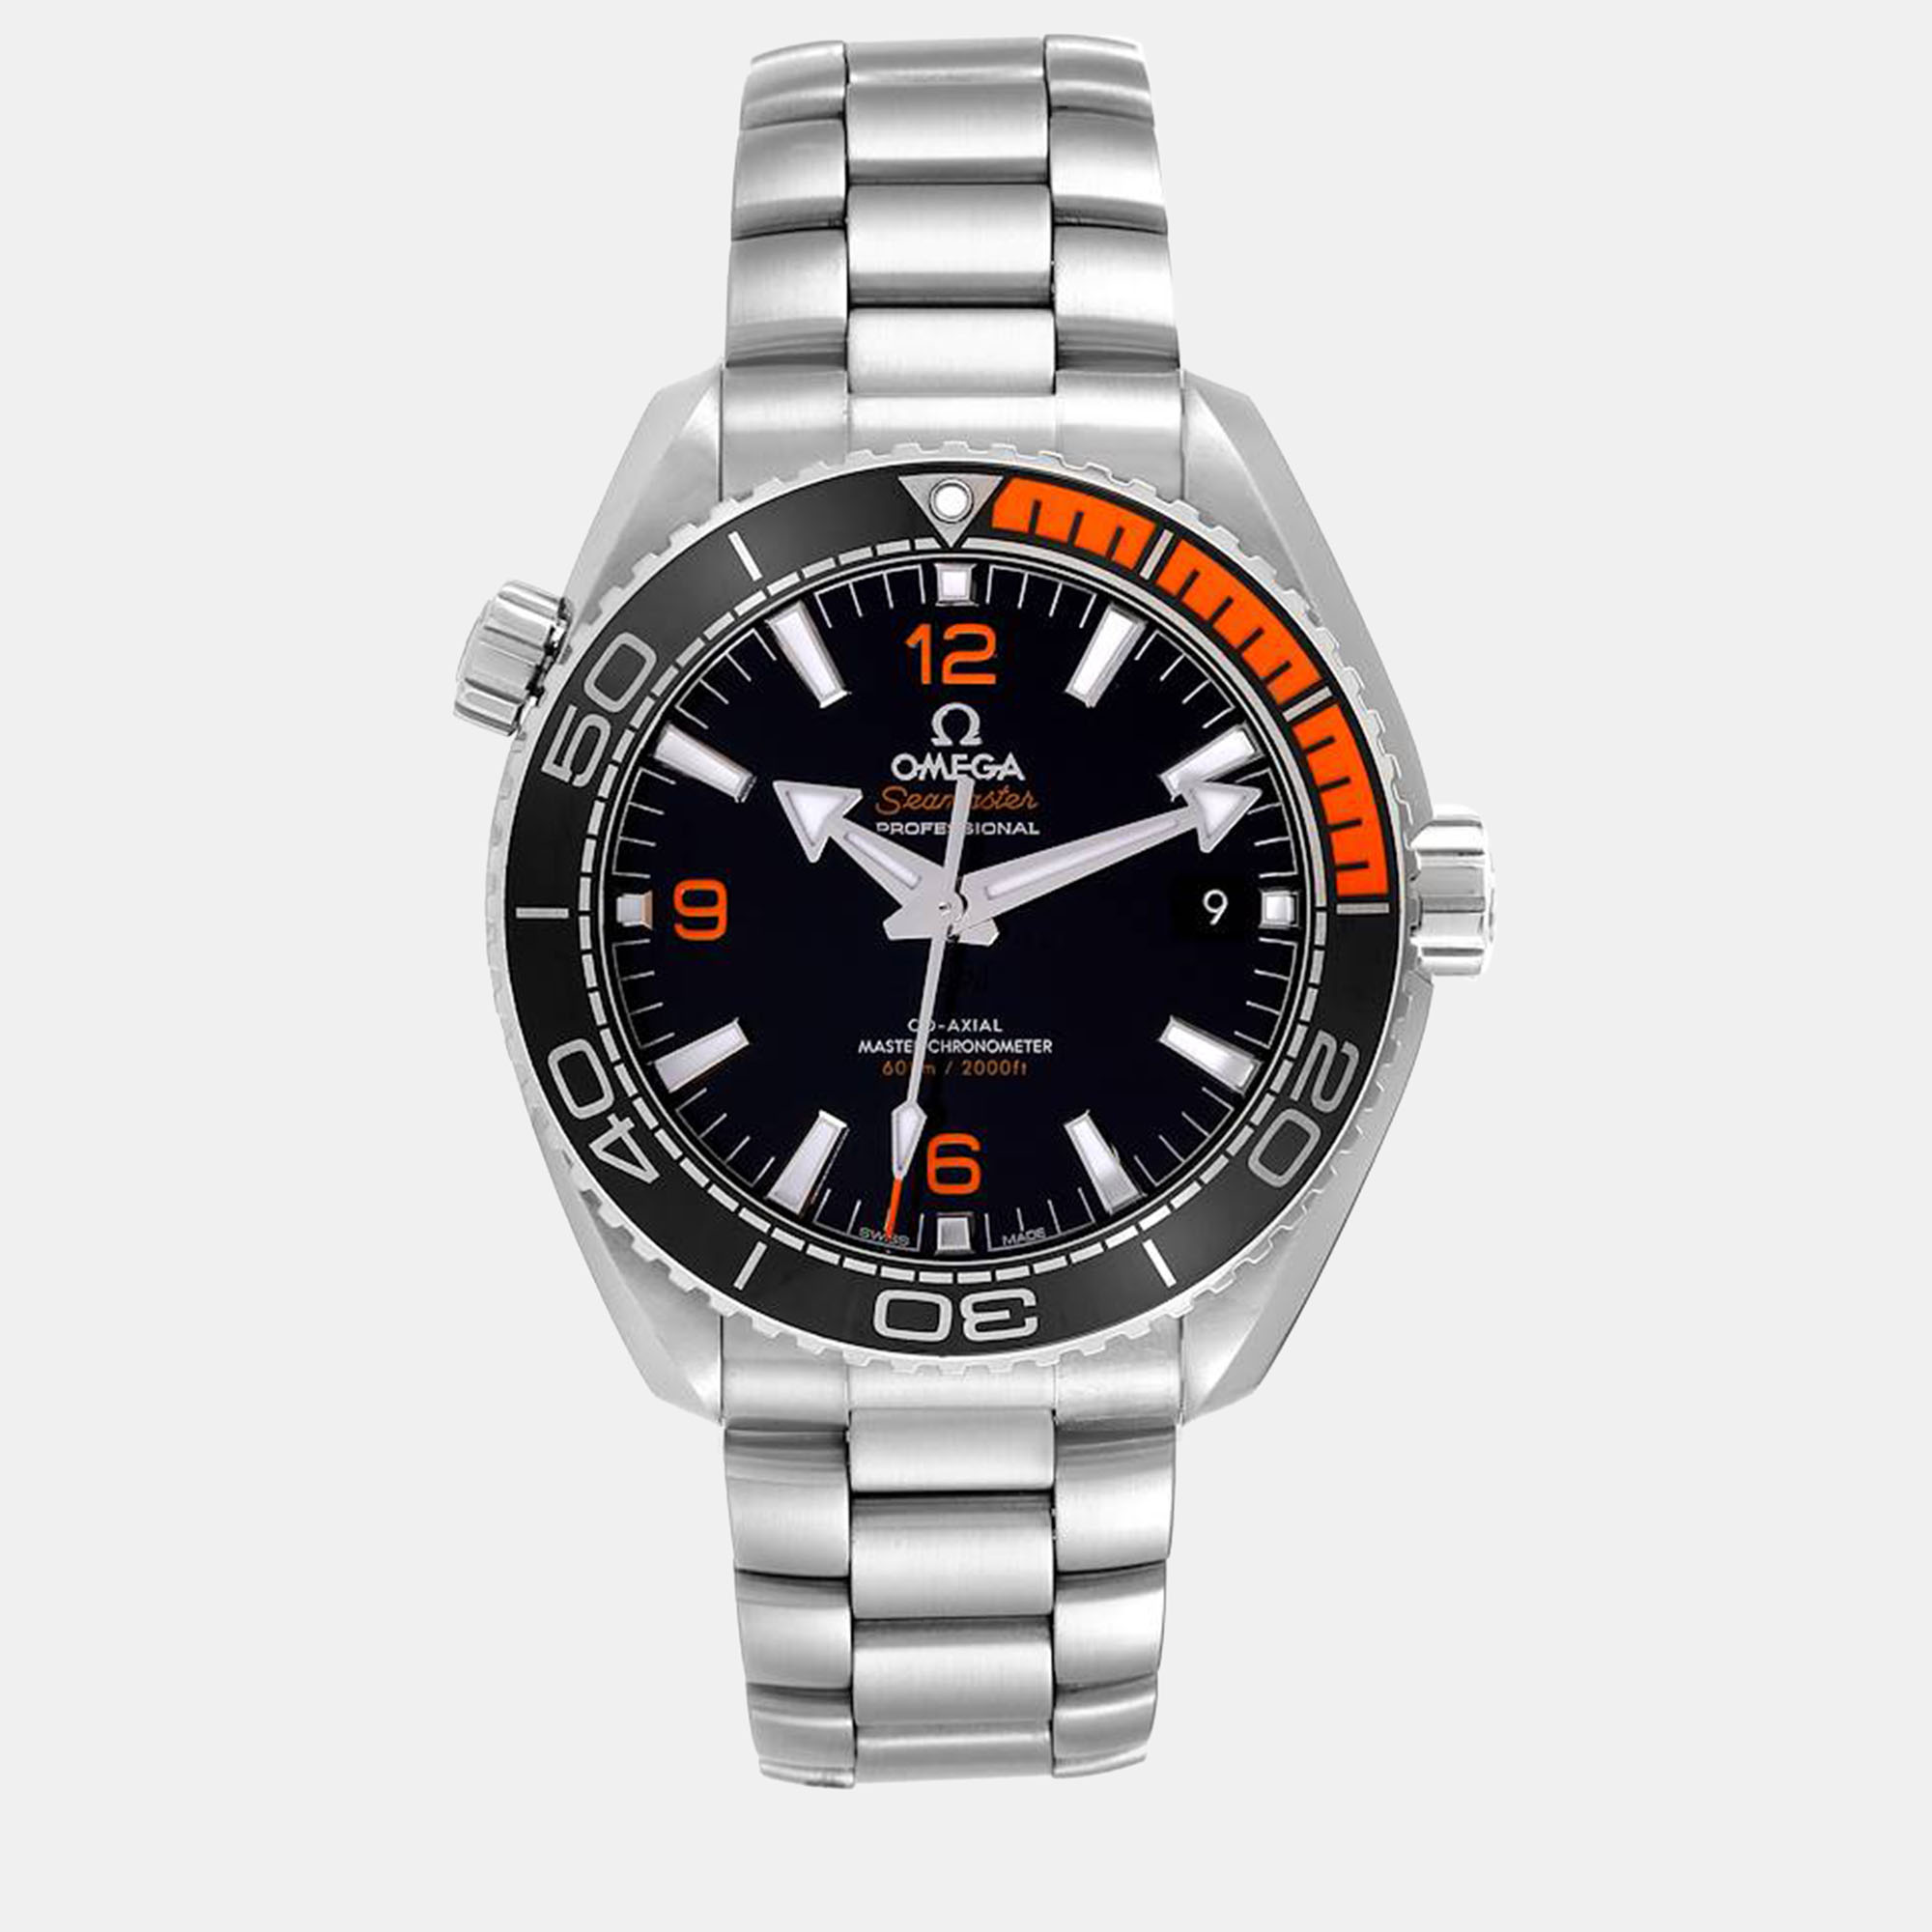 Omega black stainless steel seamaster planet ocean 215.30.44.21.01.002 automatic men's wristwatch 43.5 mm